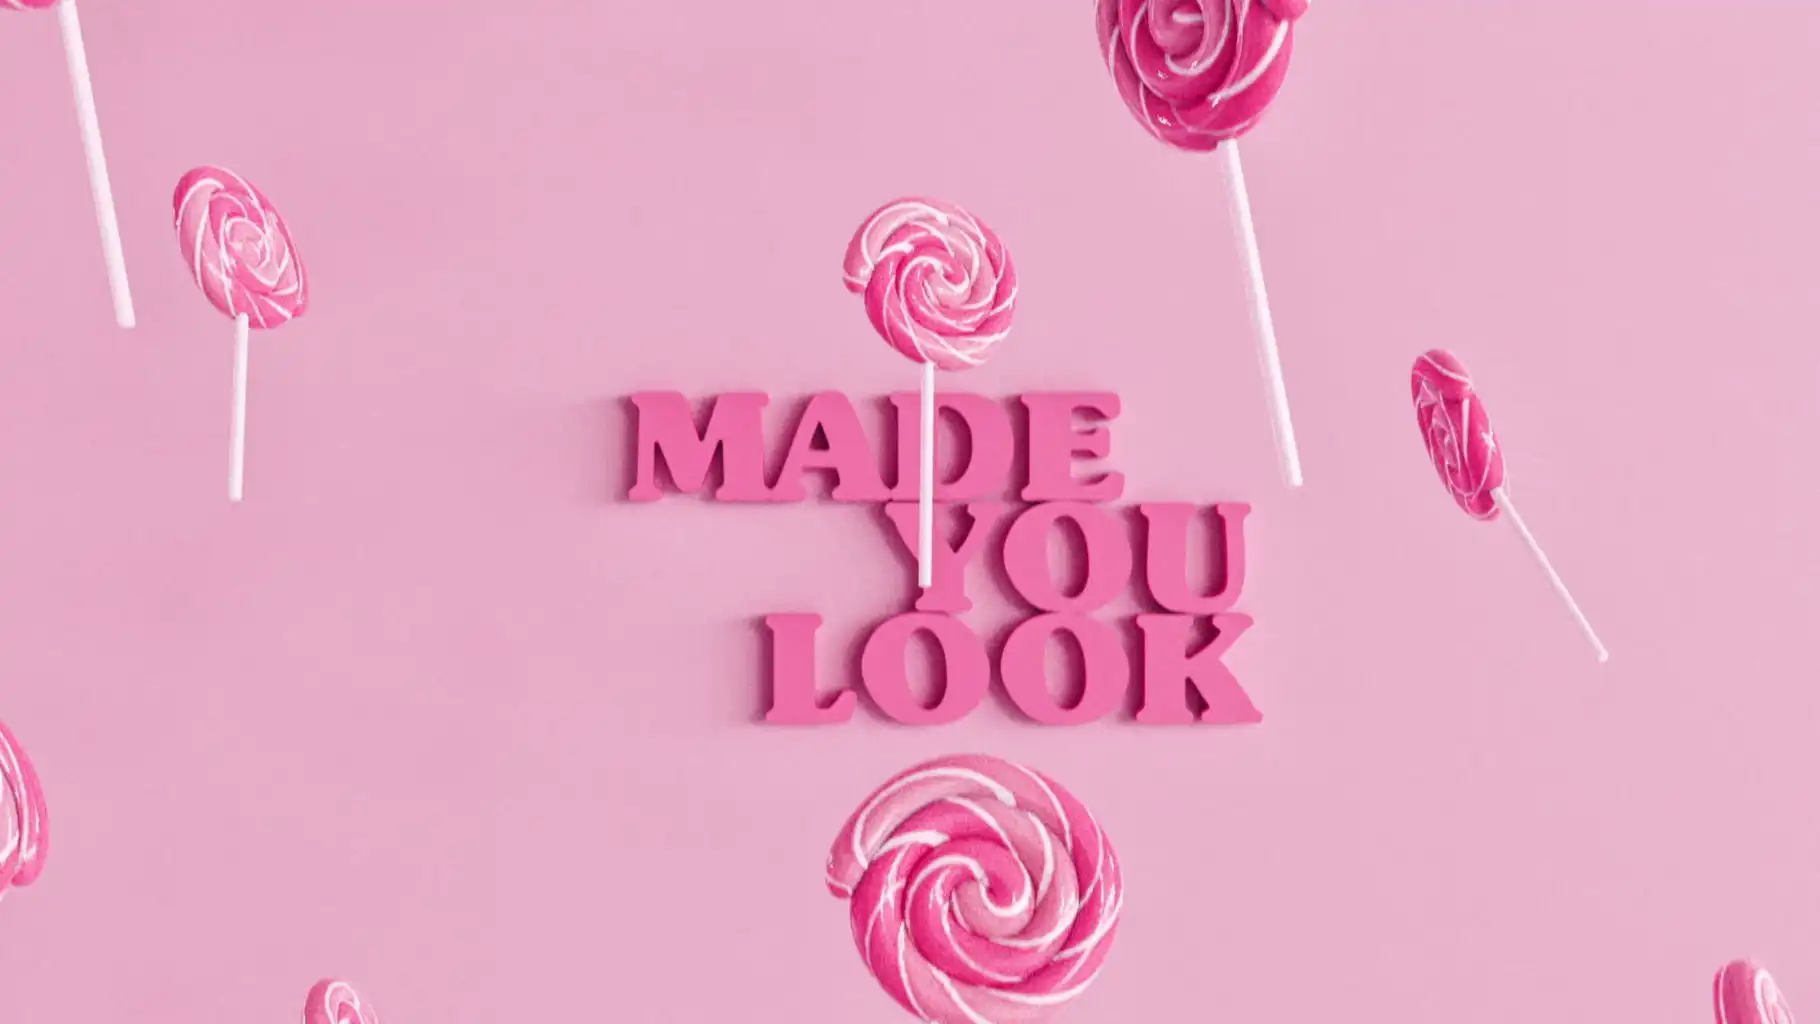 Meghan Trainor - Made You Look (Joel Corry Remix - Official Audio